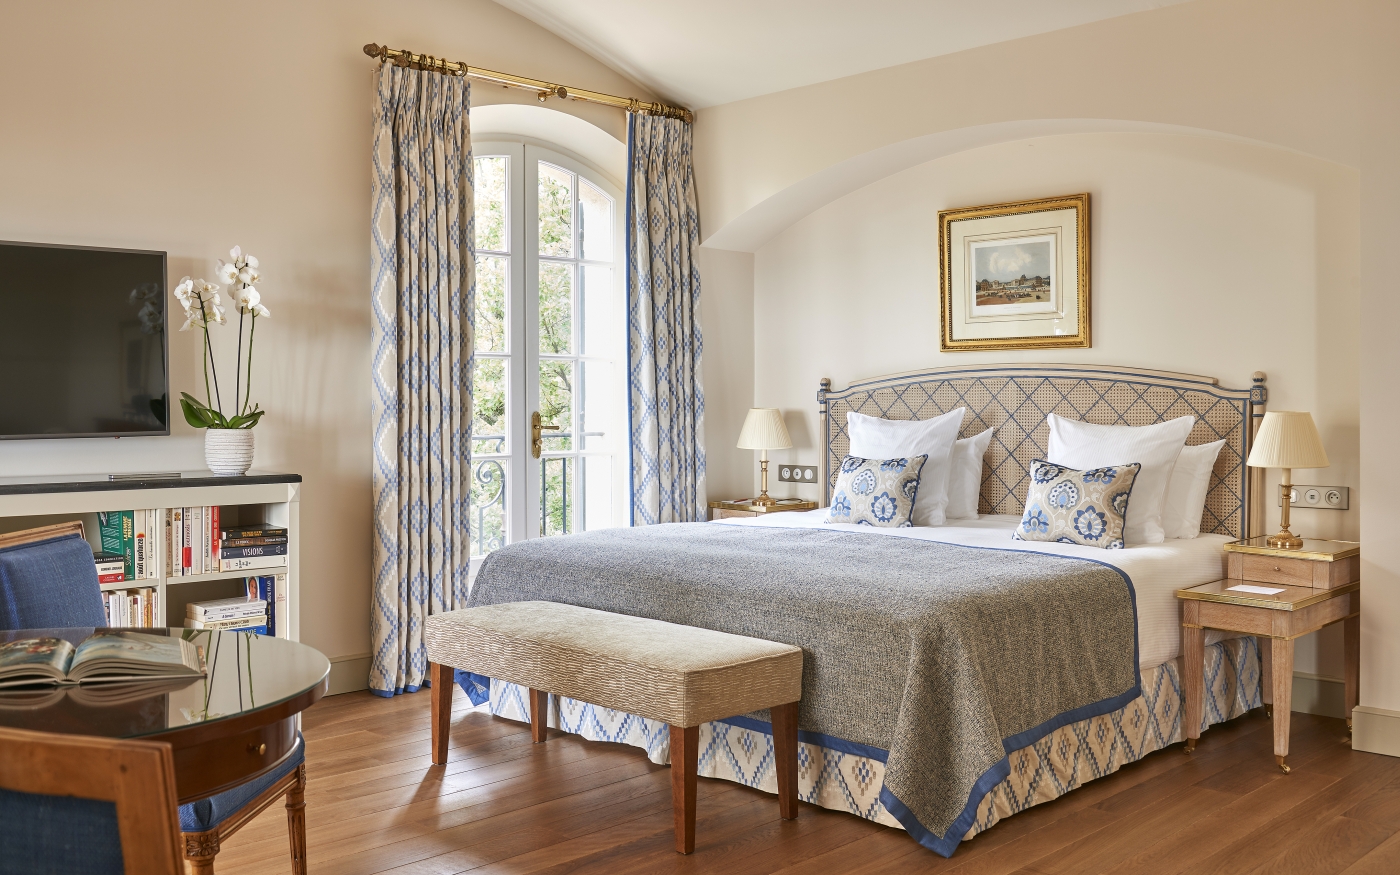 Prestige Junior Suite at Chateau Saint-Martin and Spa in France